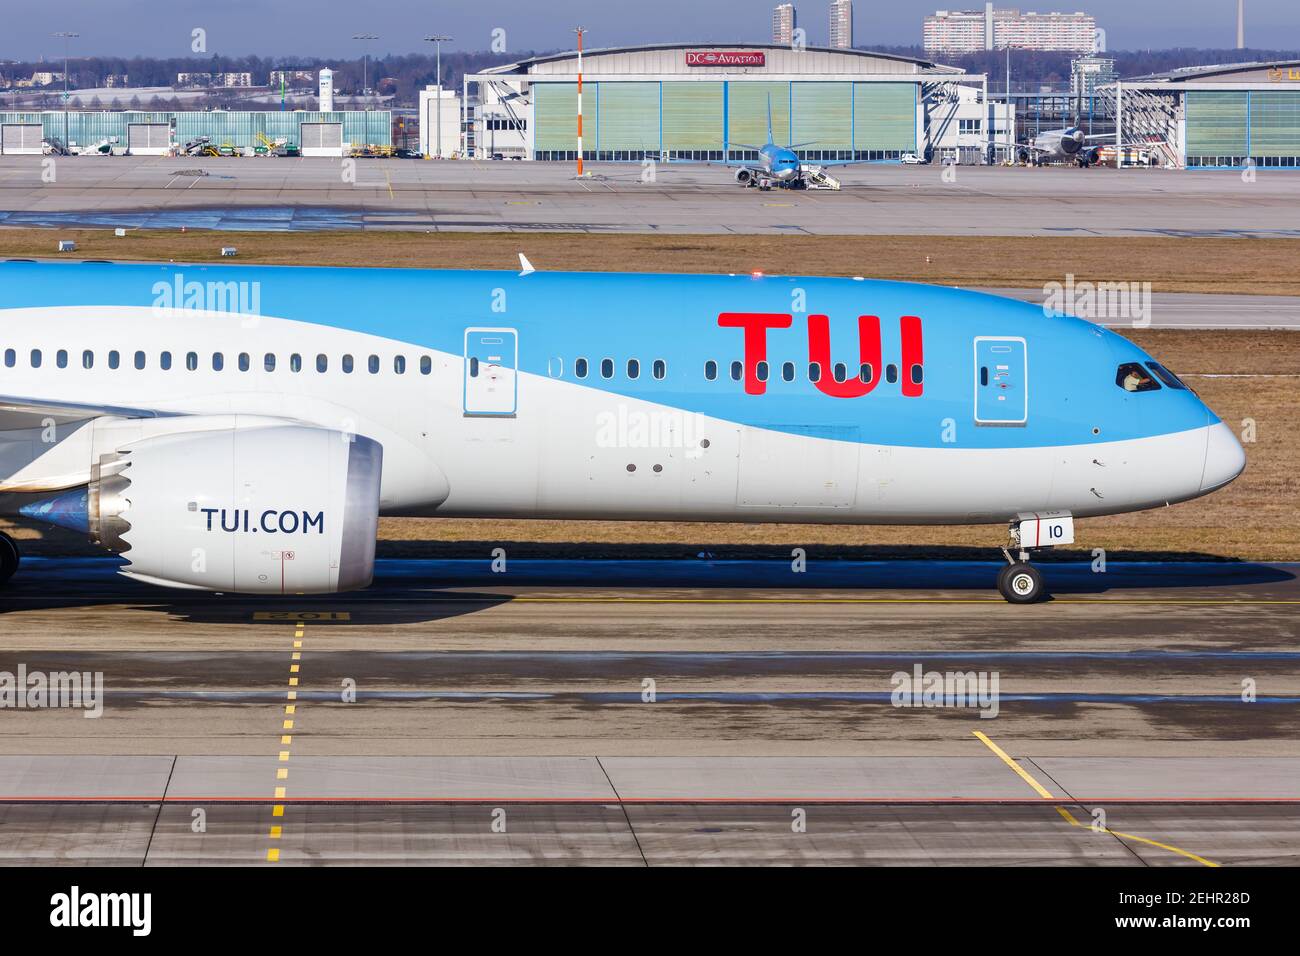 Stuttgart, Germany - January 15, 2021: TUI Boeing 787-9 Dreamliner airplane at Stuttgart Airport (STR) in Germany. Boeing is an American aircraft manu Stock Photo